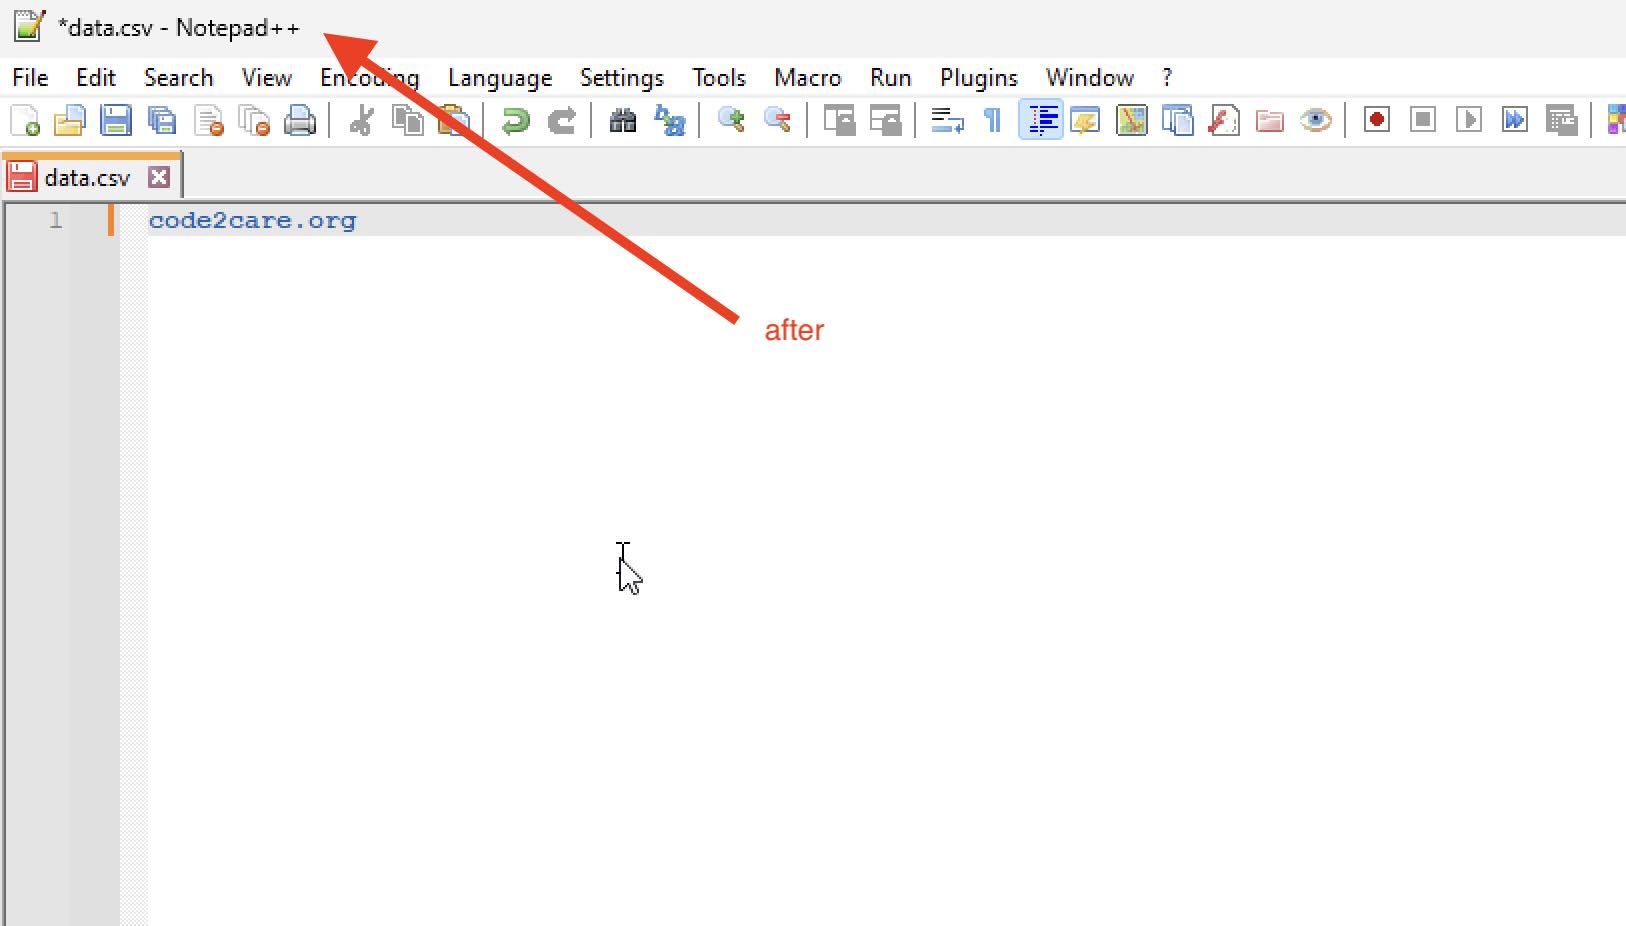 Only File name on Notepad++ Title bar